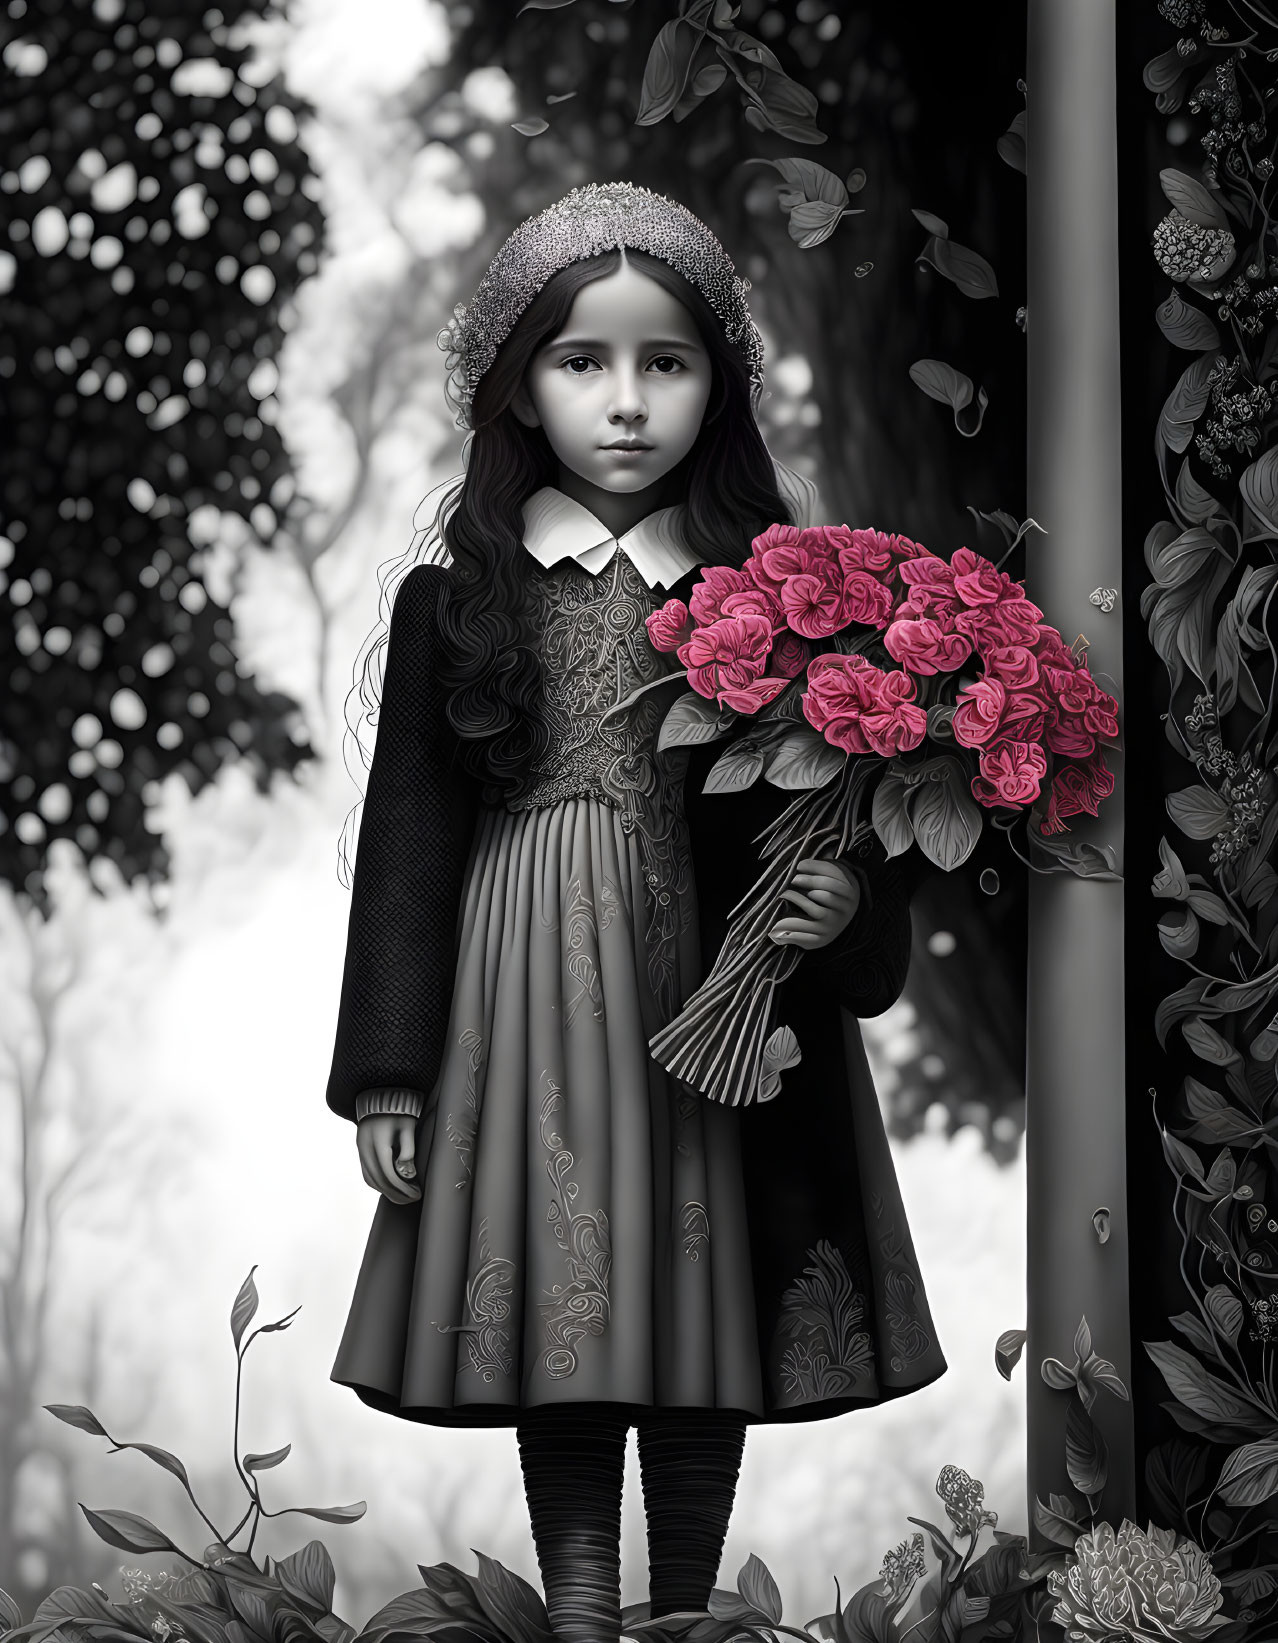 Monochromatic image of young girl with red rose bouquet in vintage dress